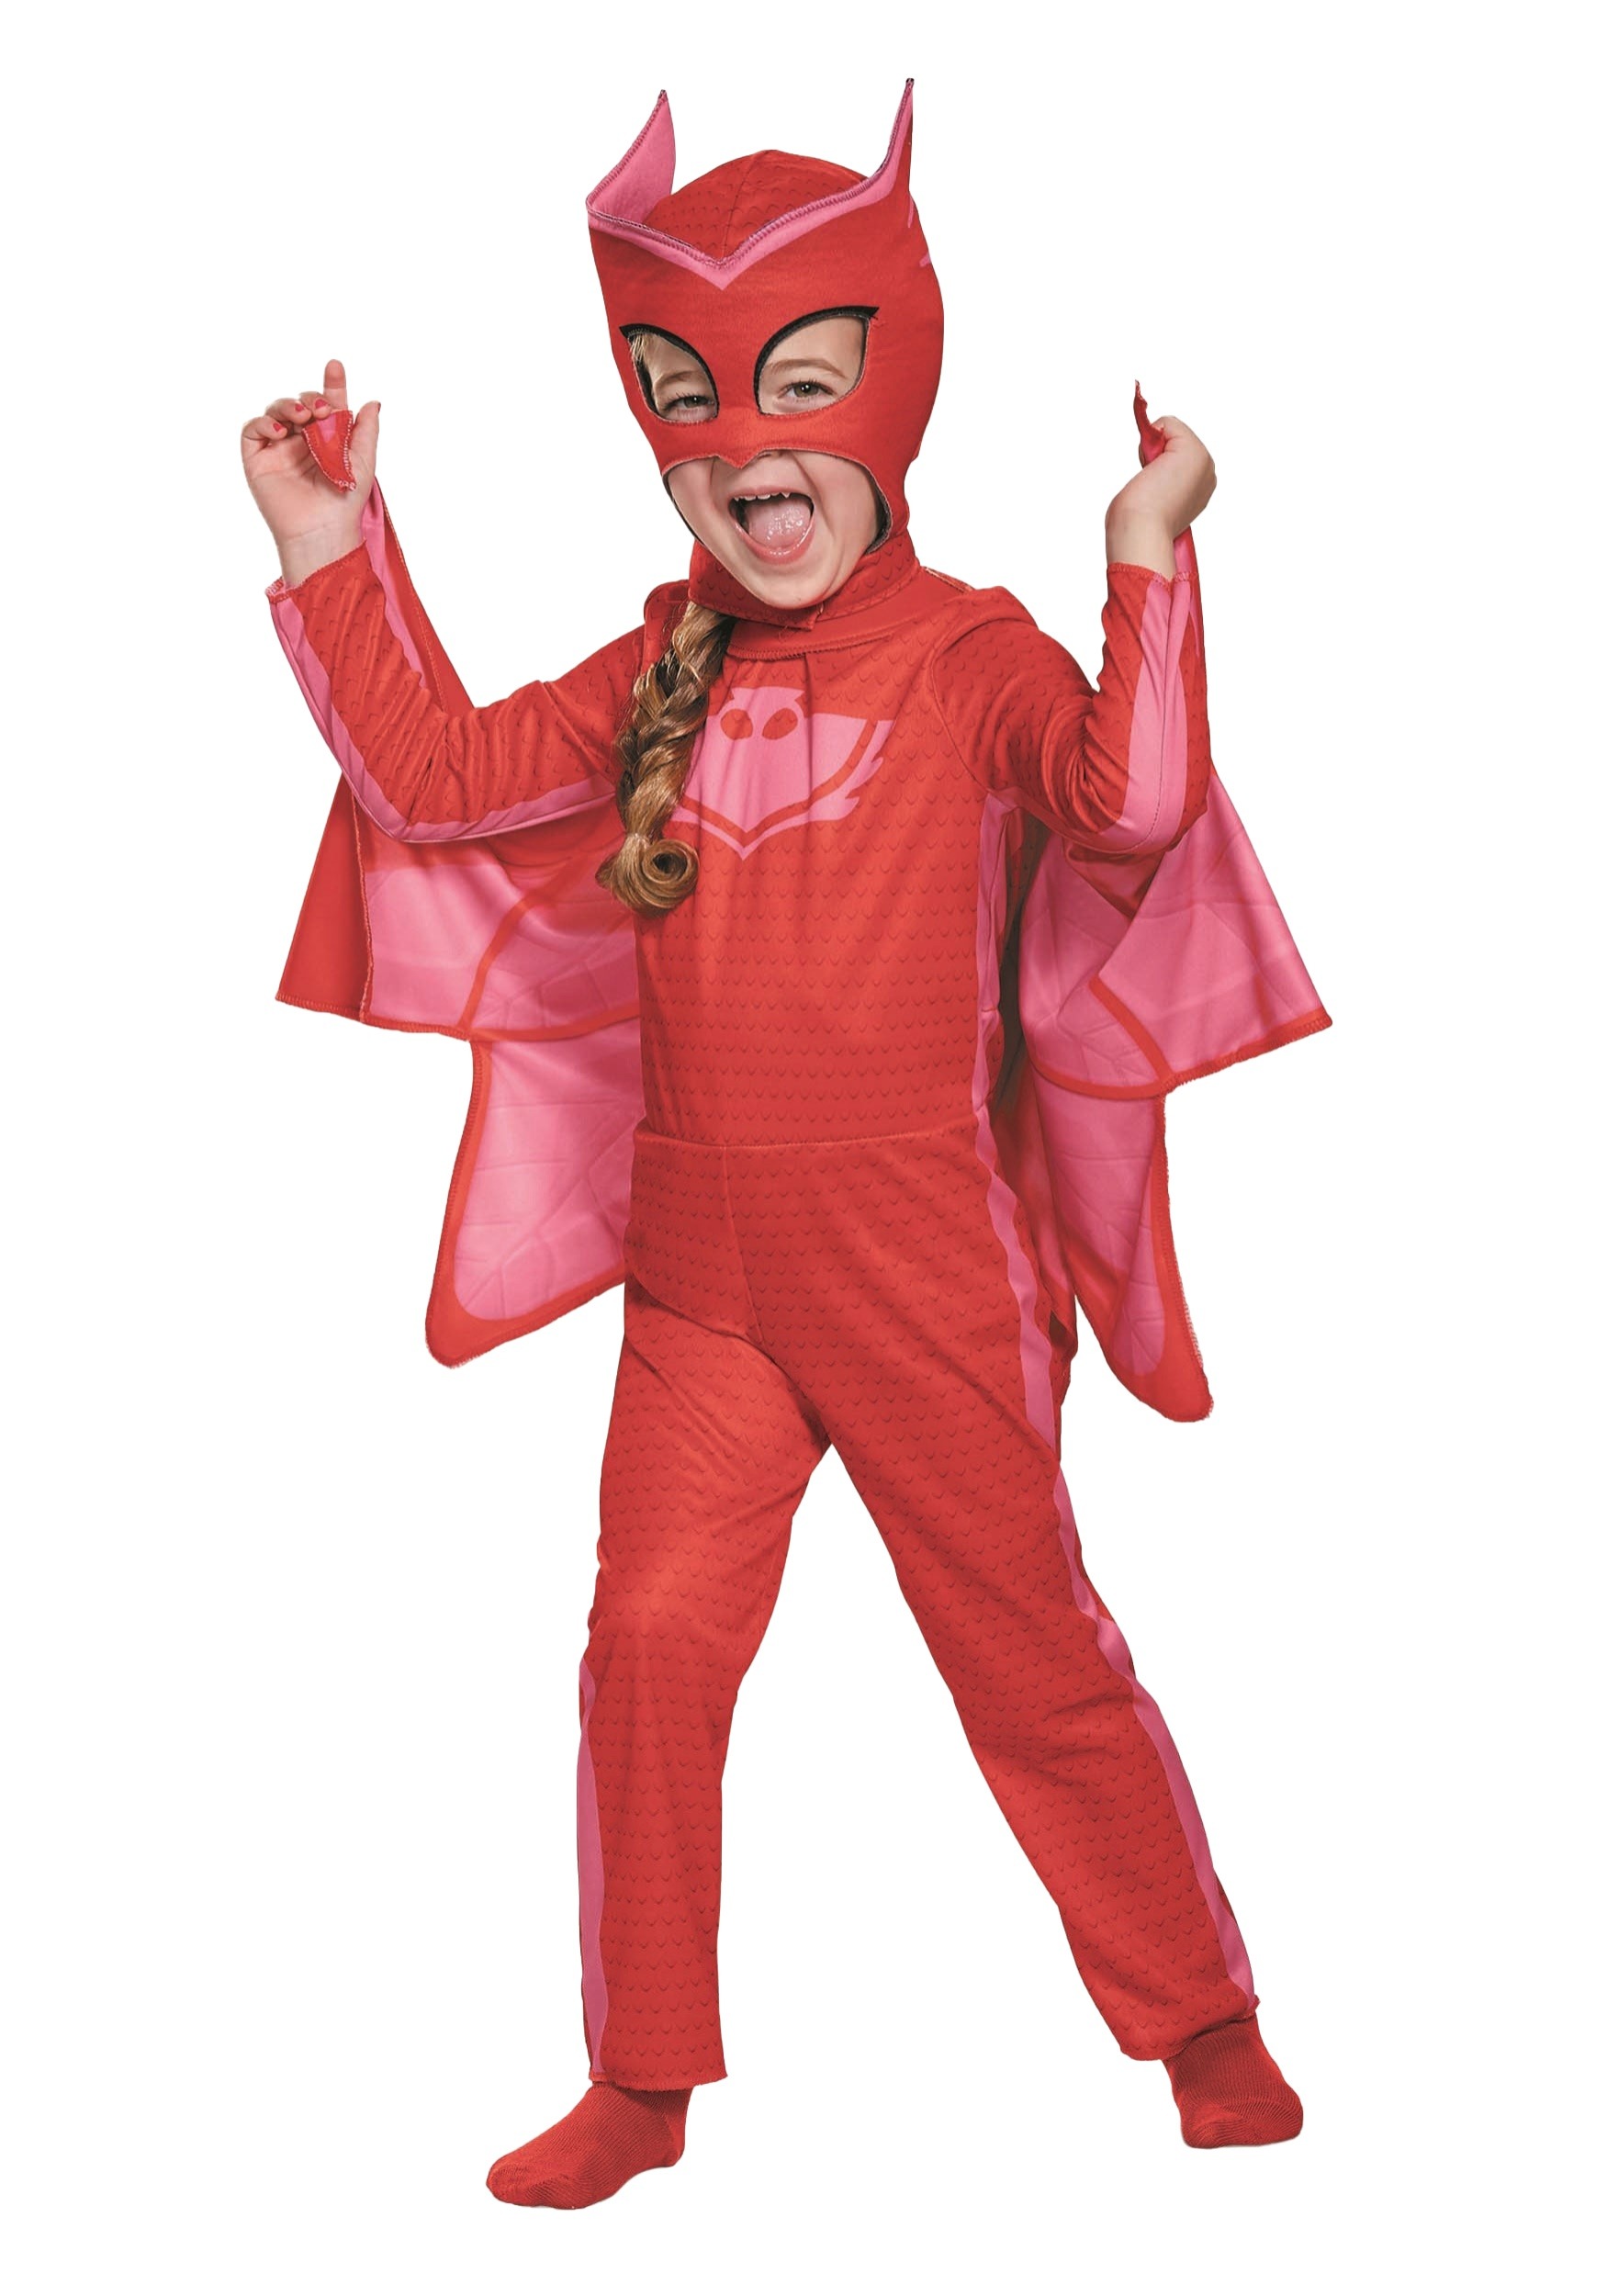 Photos - Fancy Dress PJ Masks Disguise  Classic Owlette Costume for Toddlers Red DI17156 